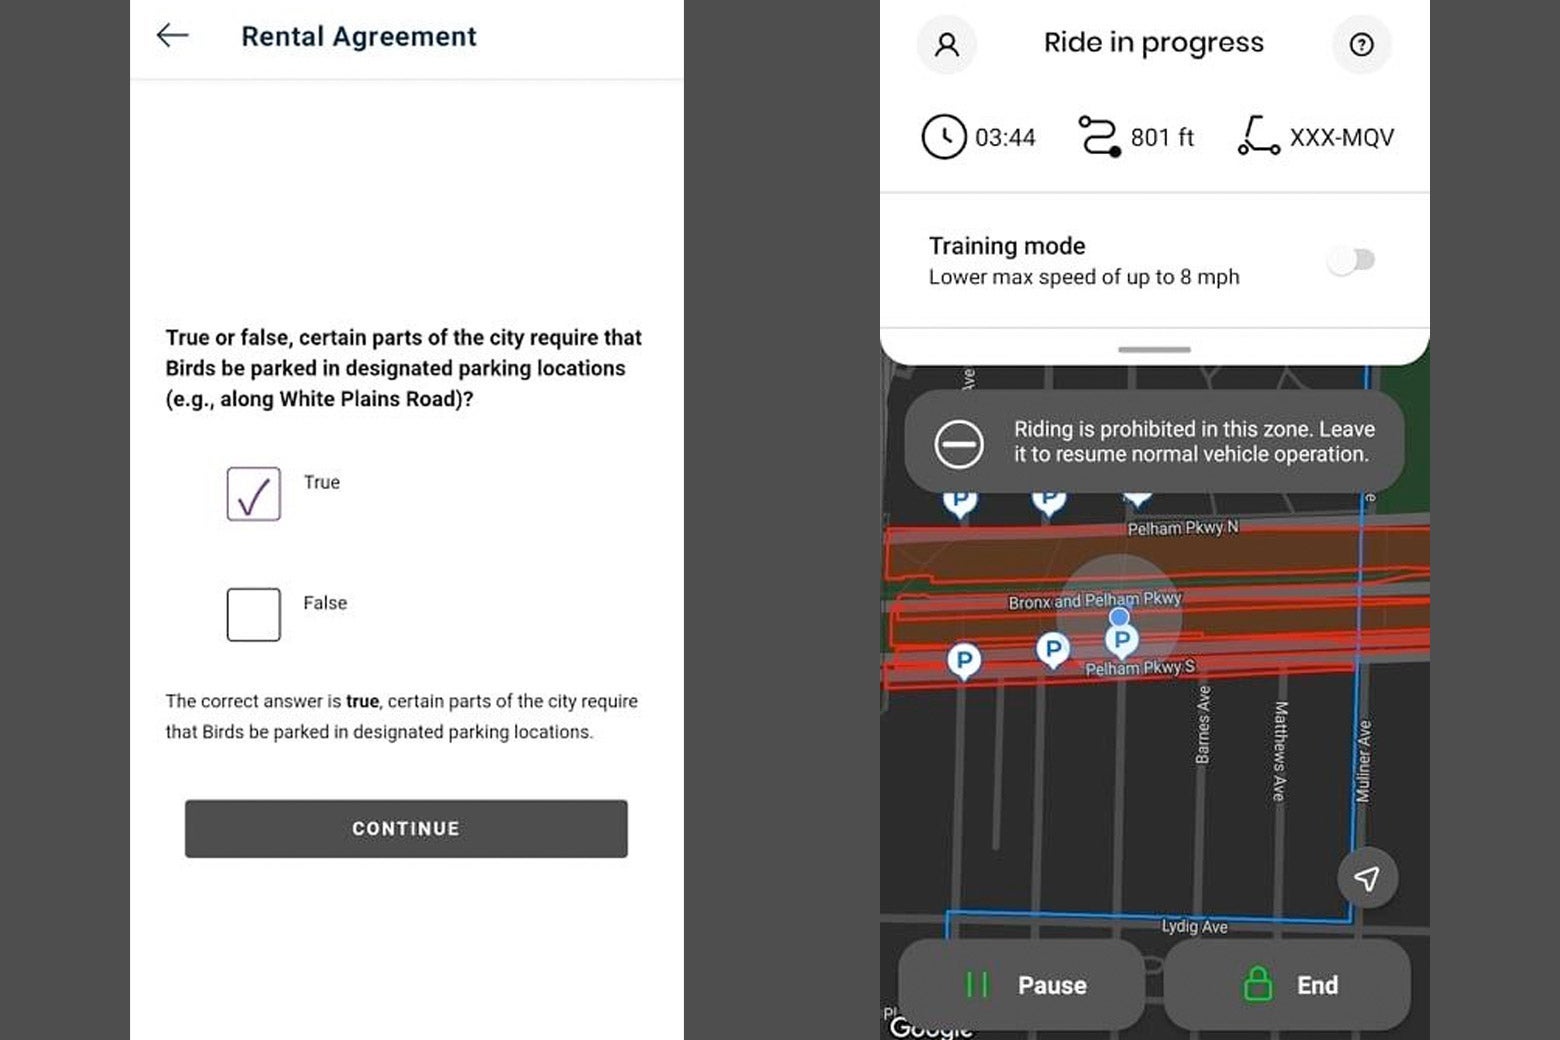 A screenshot of a page in the app asking a true or false question about where Bird scooters can be parked and another screenshot pointing out that "riding is prohibited in this zone."